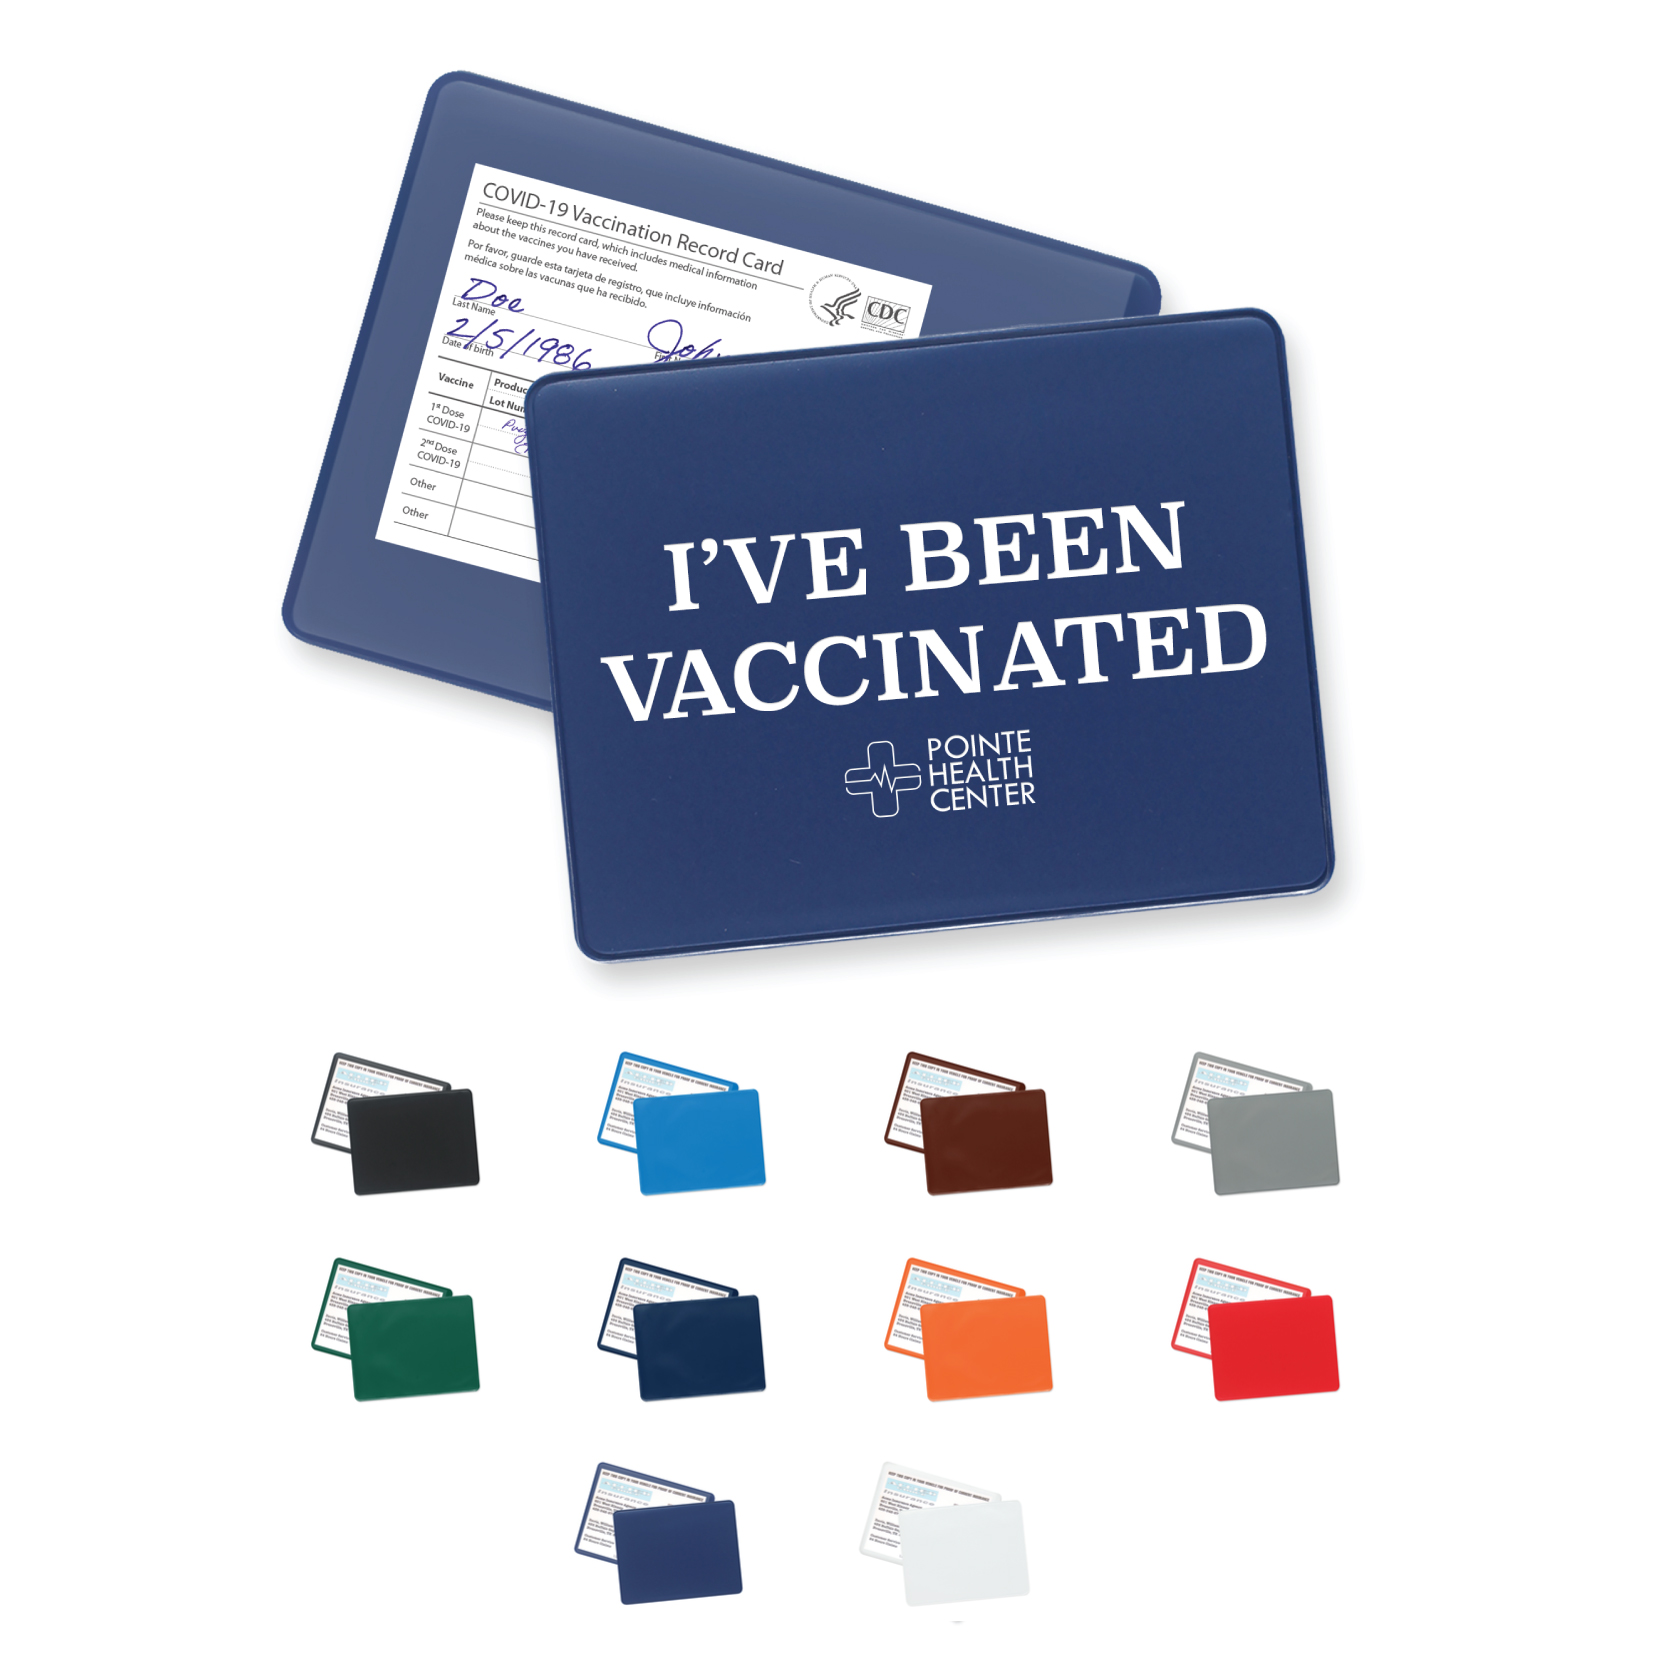 COVID-19 Large Vaccination Card Holder